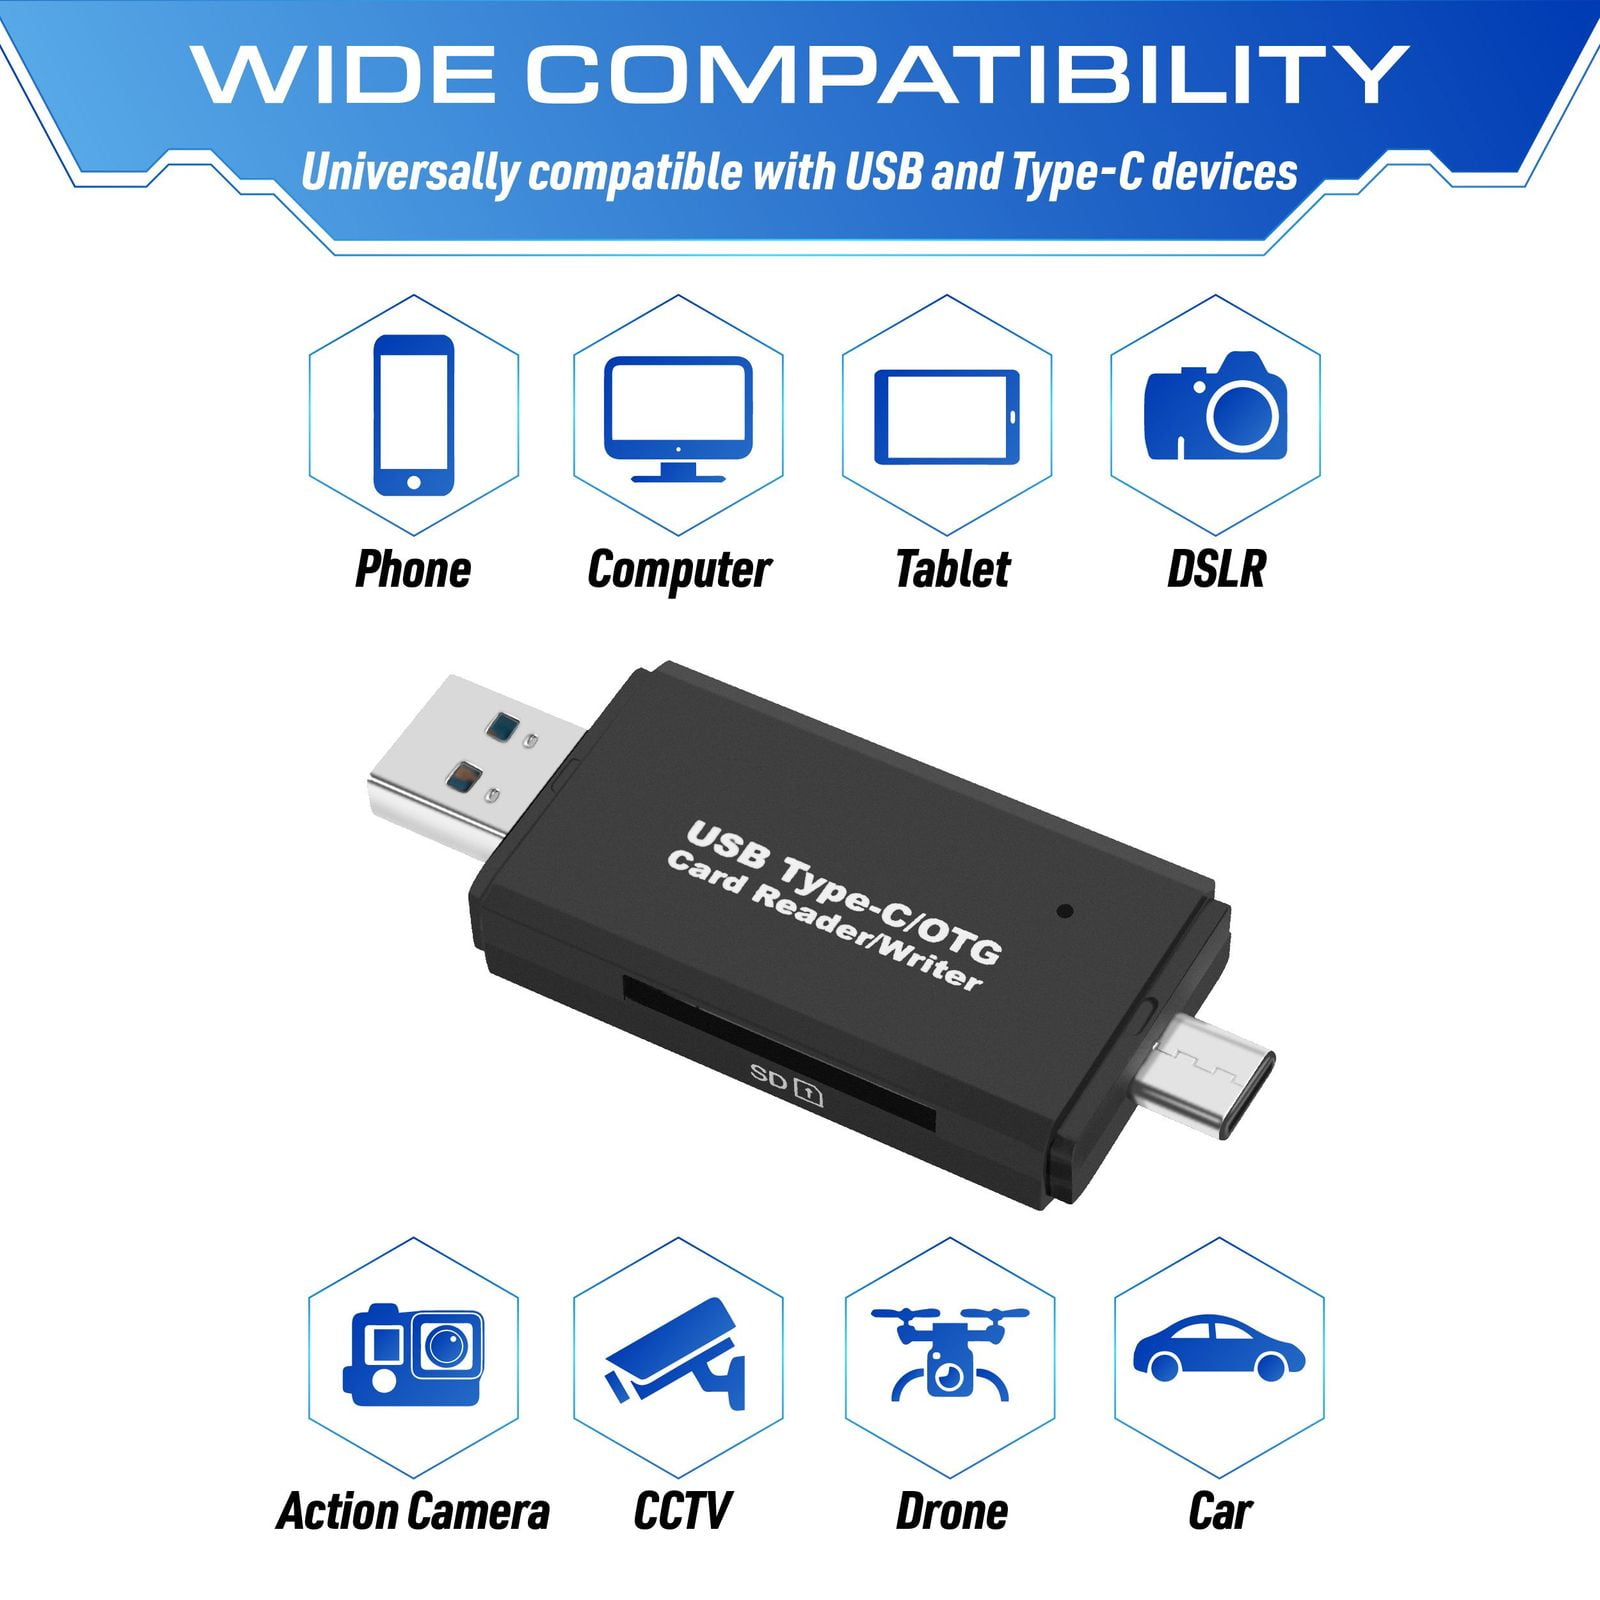 USB Type C SD Card Reader, USB 3.0 SD Card Reader OTG Adapter for SDXC, SDHC, RS-MMC, Micro SDXC, Micro SD, TF, SDHC Card and UHS-I for Mac OS